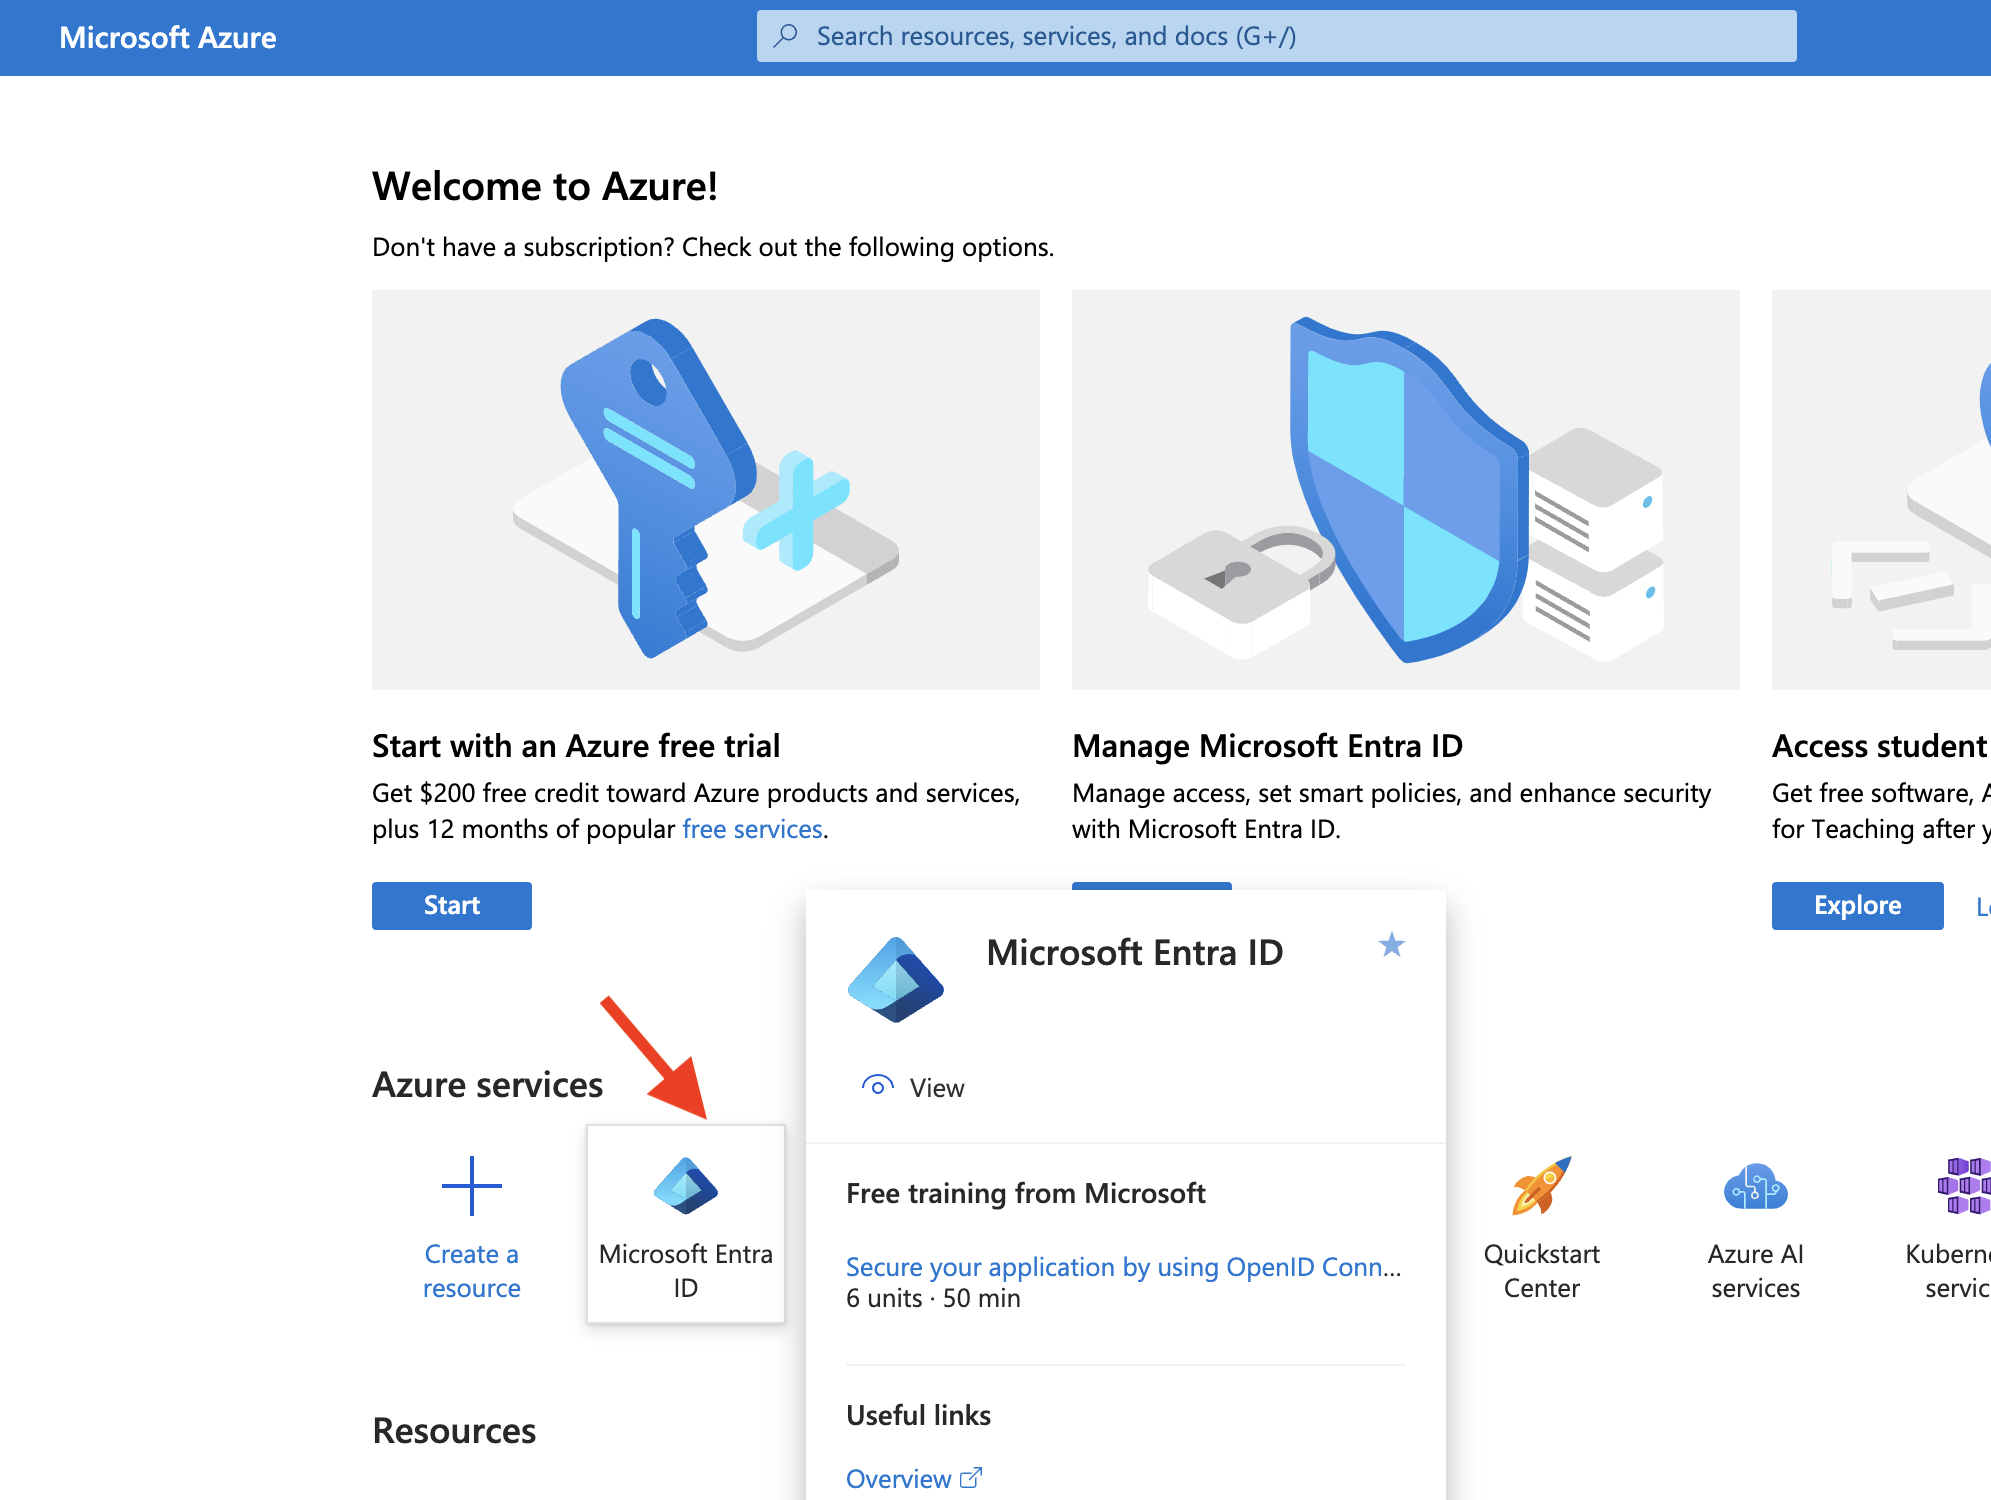 Azure Home: Select Microsoft Entra ID f.k.a. Azure Active Directory